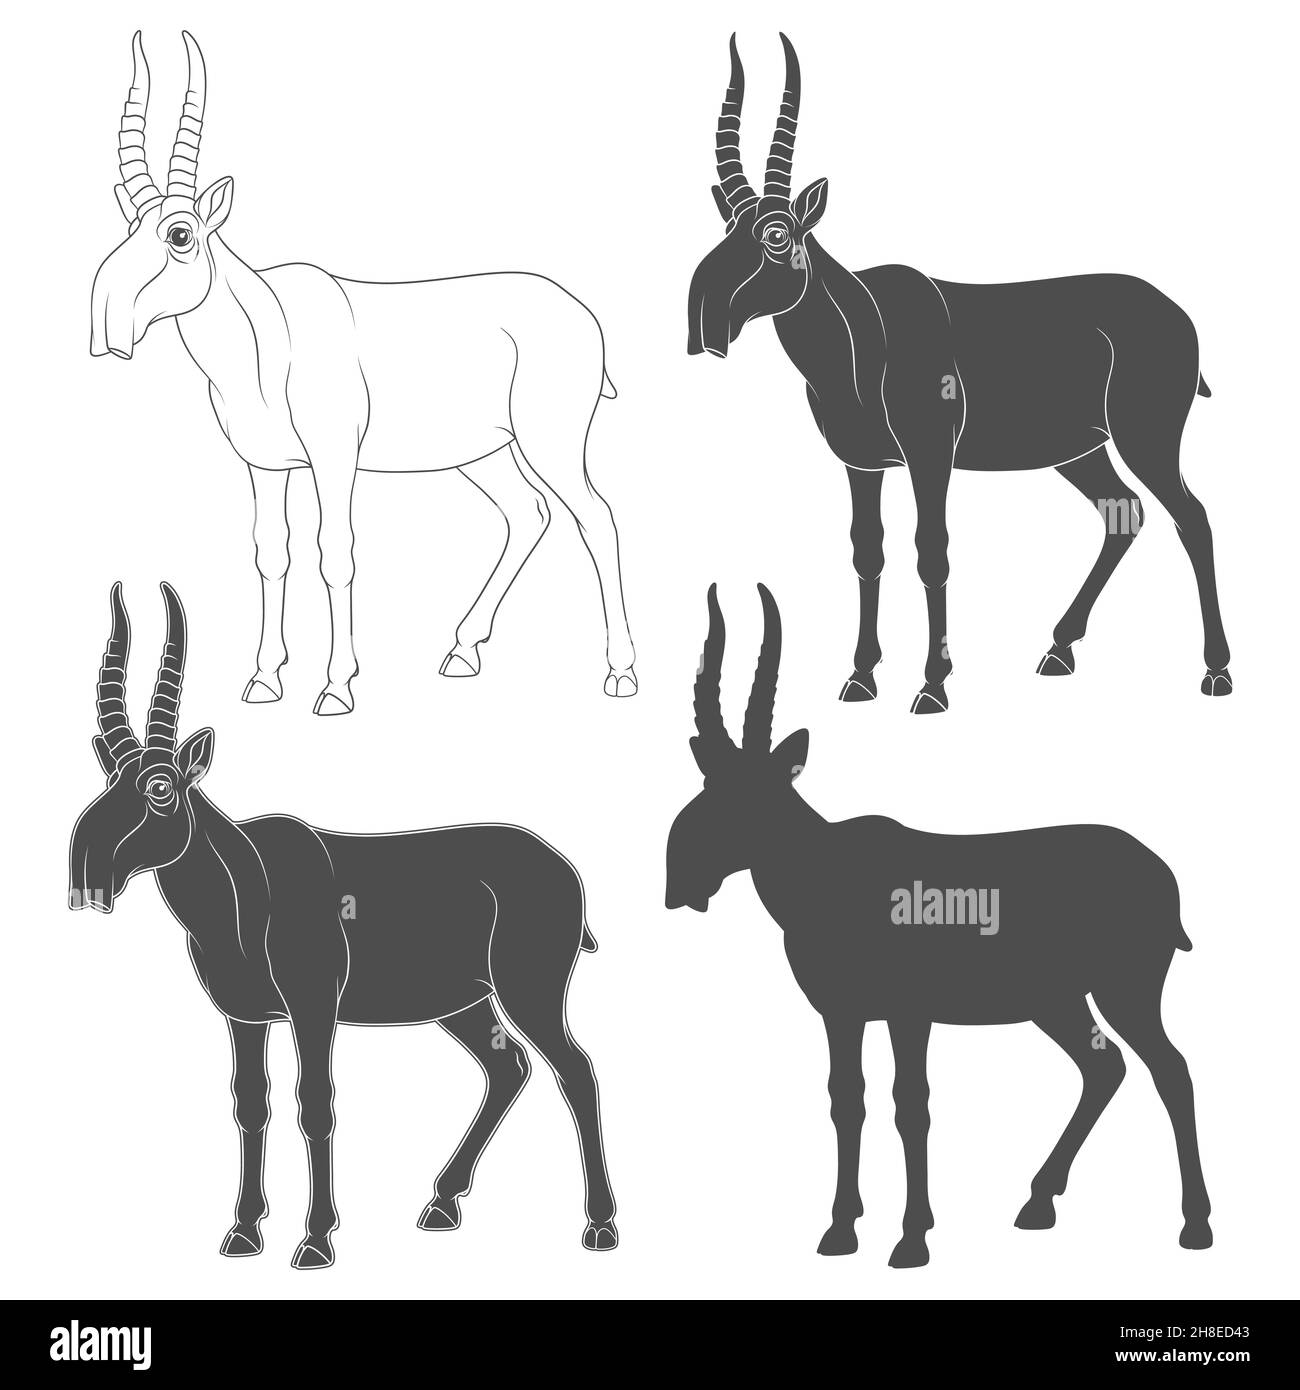 Set of black and white illustrations depicting a saiga antelope. Isolated vector objects on a white background. Stock Vector